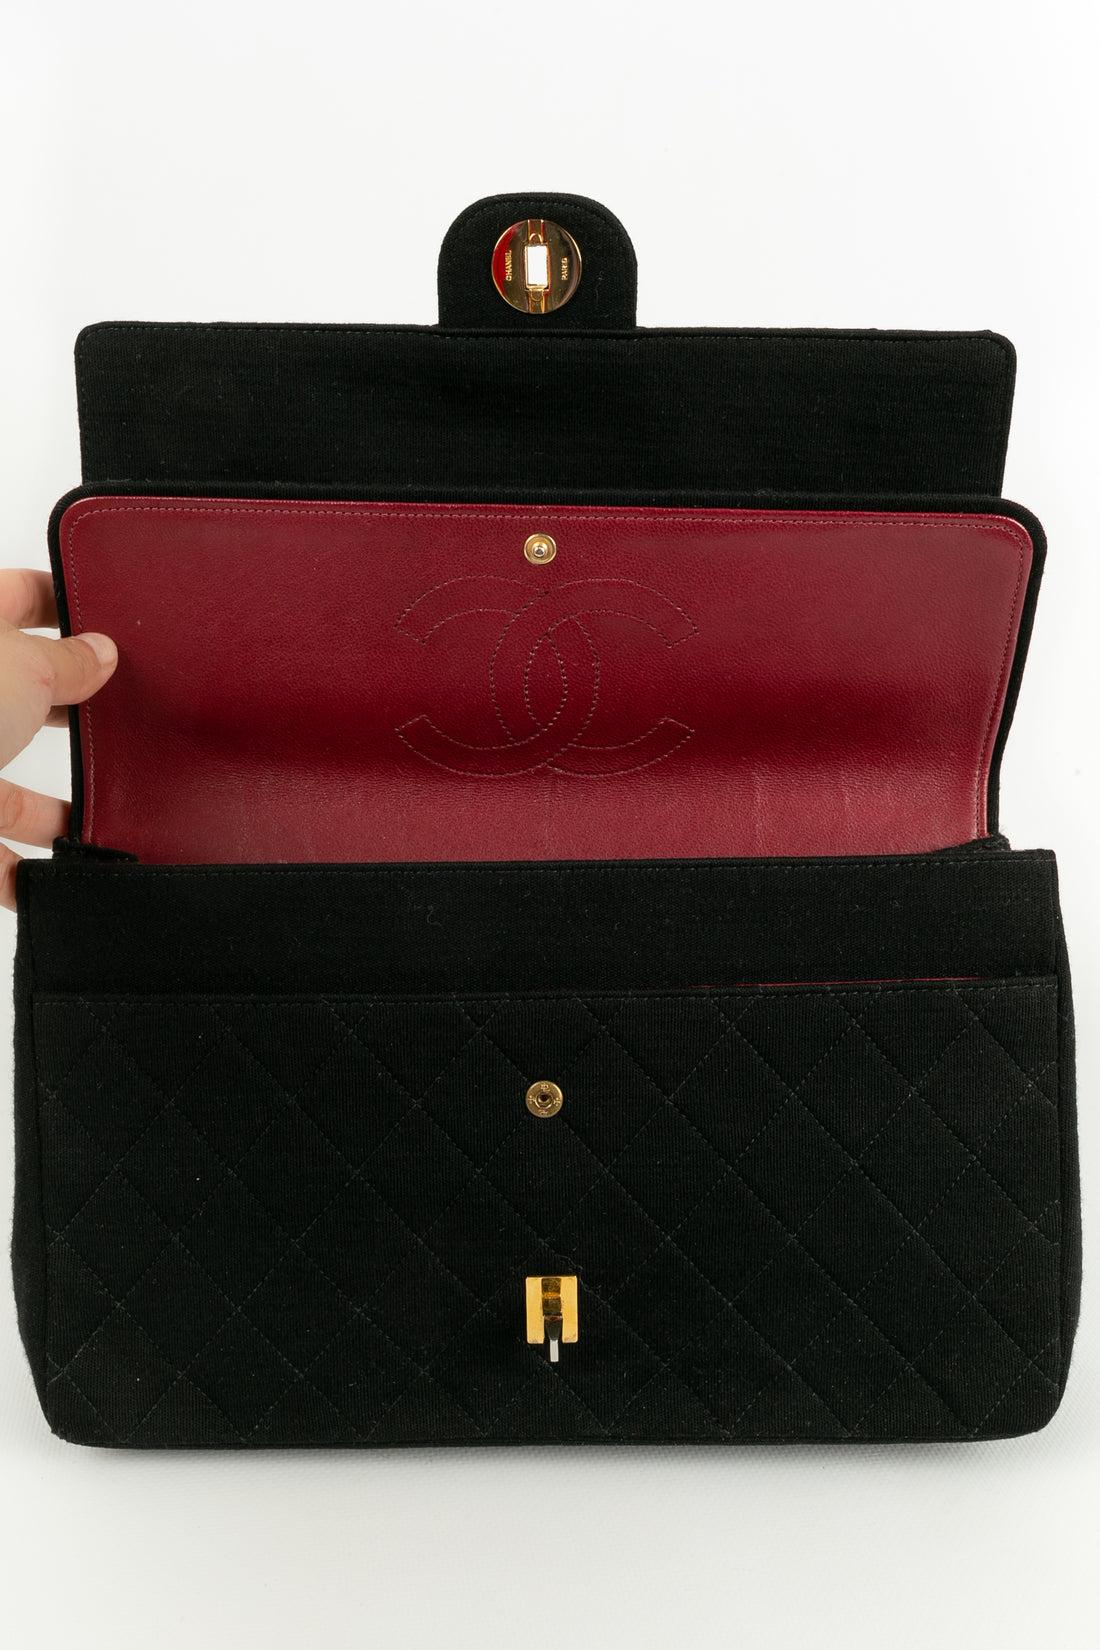 Chanel Black Quilted Jersey Bag For Sale 7